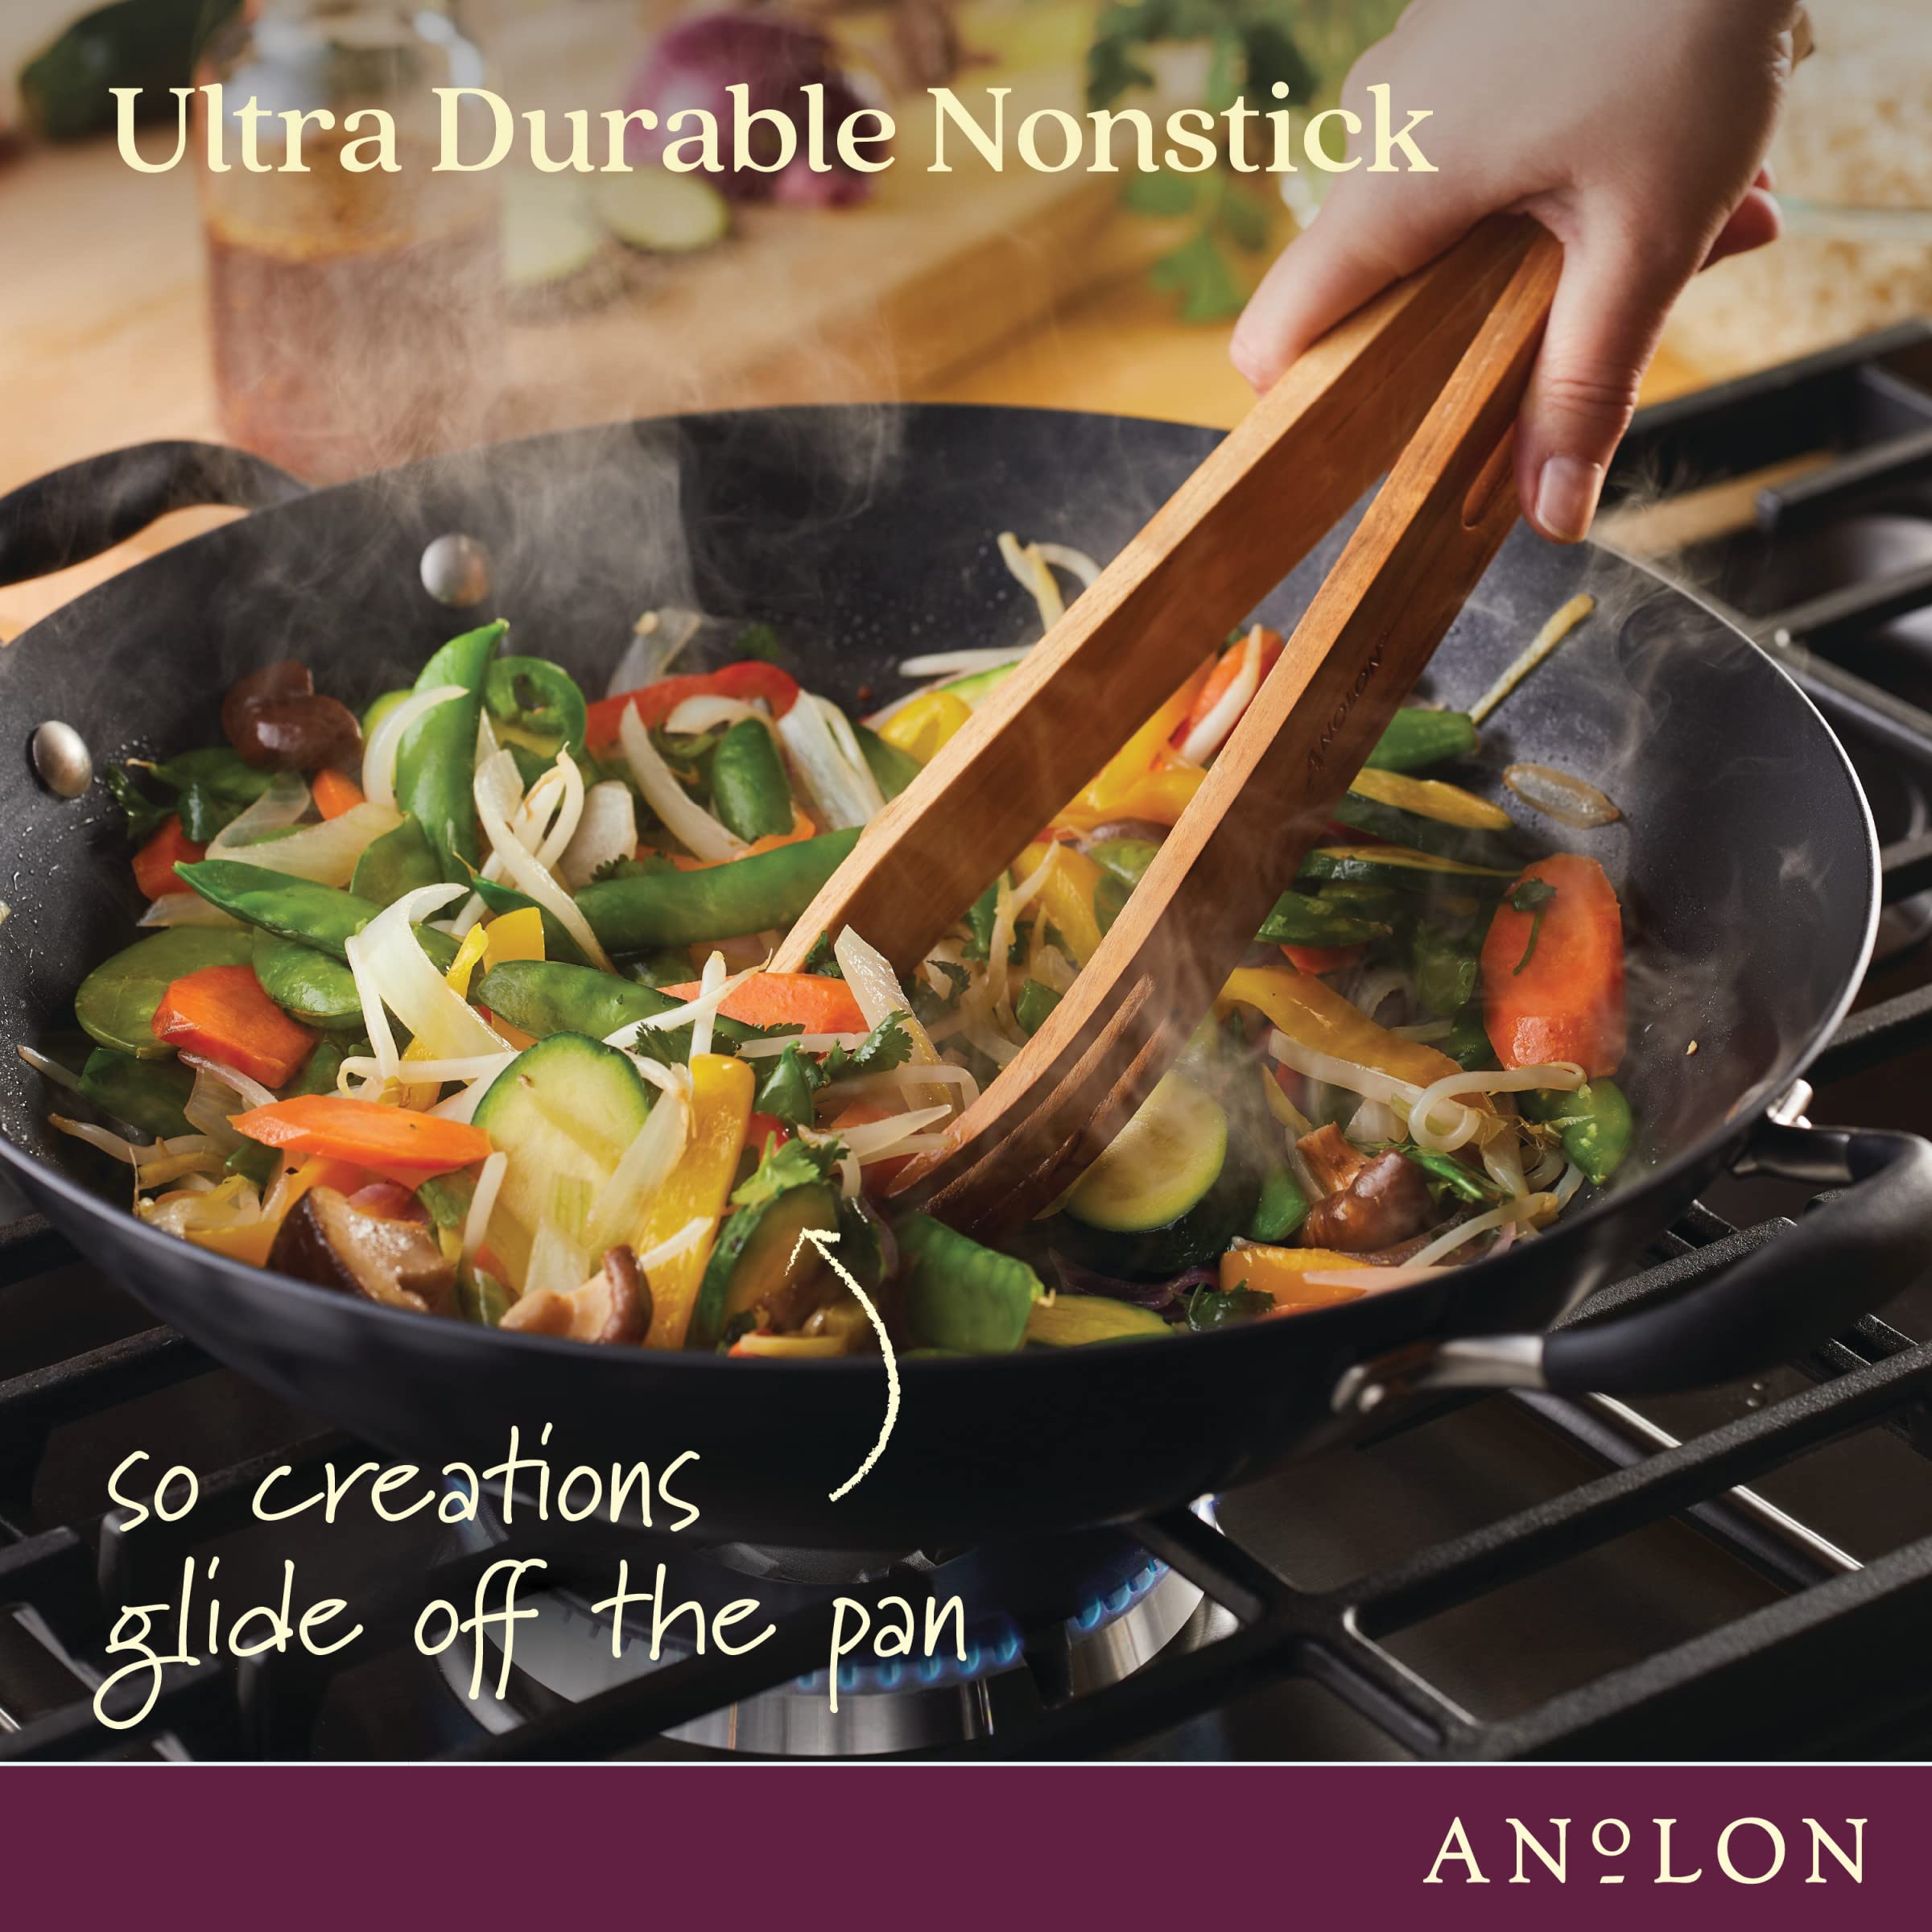 Anolon Advanced Home Hard-Anodized Nonstick Open Stock Cookware- Woks (14-Inch Covered Wok, Onyx)